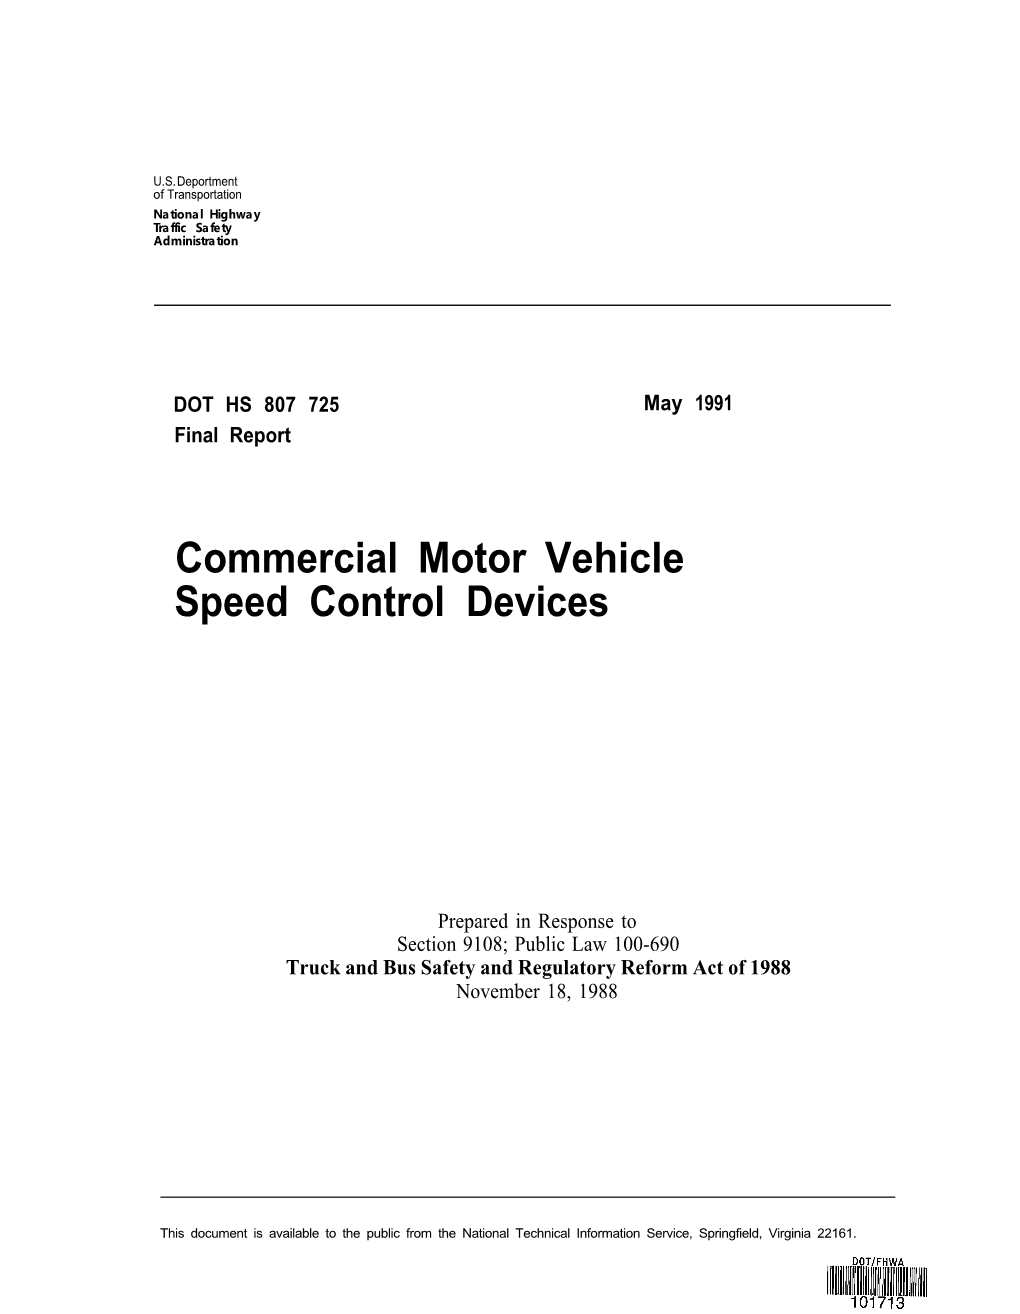 Commercial Motor Vehicle Speed Control Devices